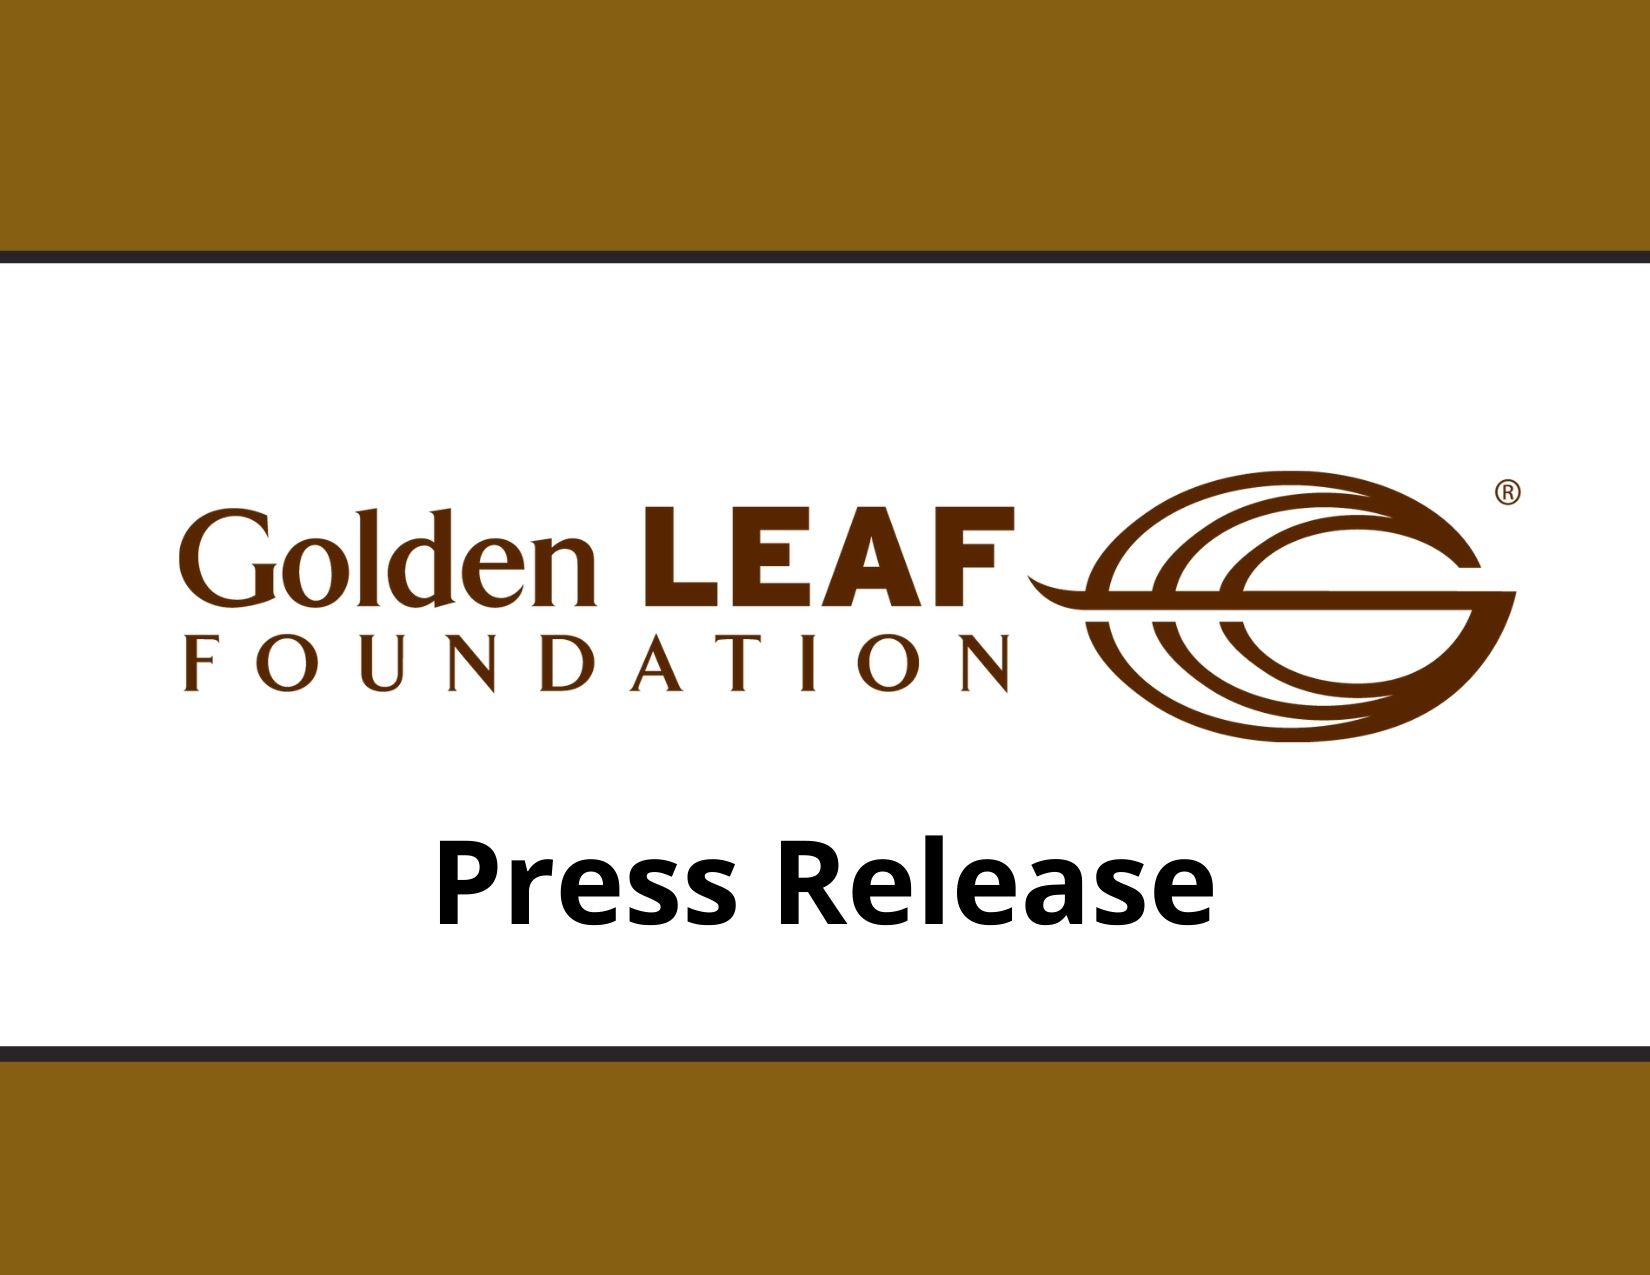 Golden LEAF Board announces 19 projects totaling more than $11M in funding, hears economic update from Tom Barkin, President of the Federal Reserve Bank of Richmond